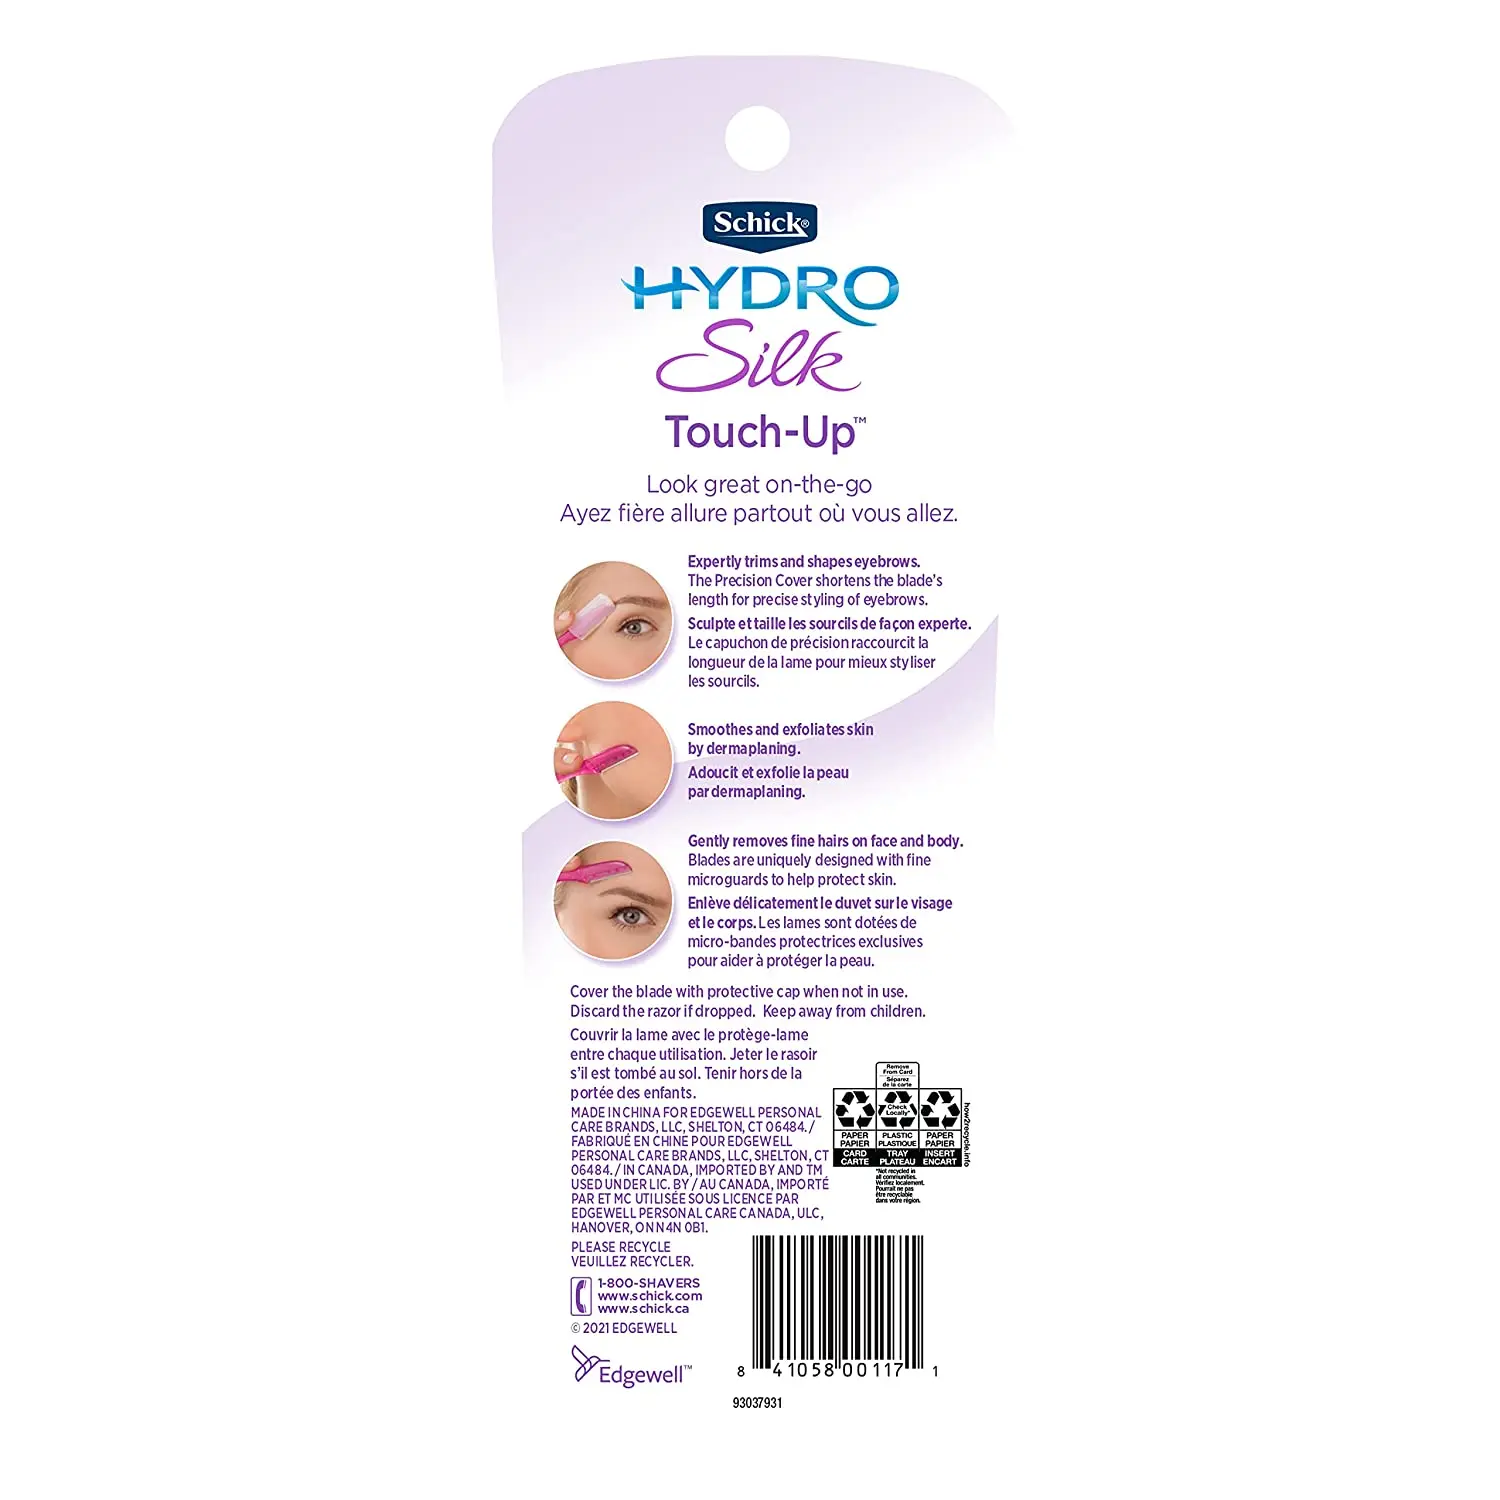 chick Hydro Silk Touch-Up Exfoliating Dermaplaning Tool, Face & Eyebrow Razor with Precision Cover